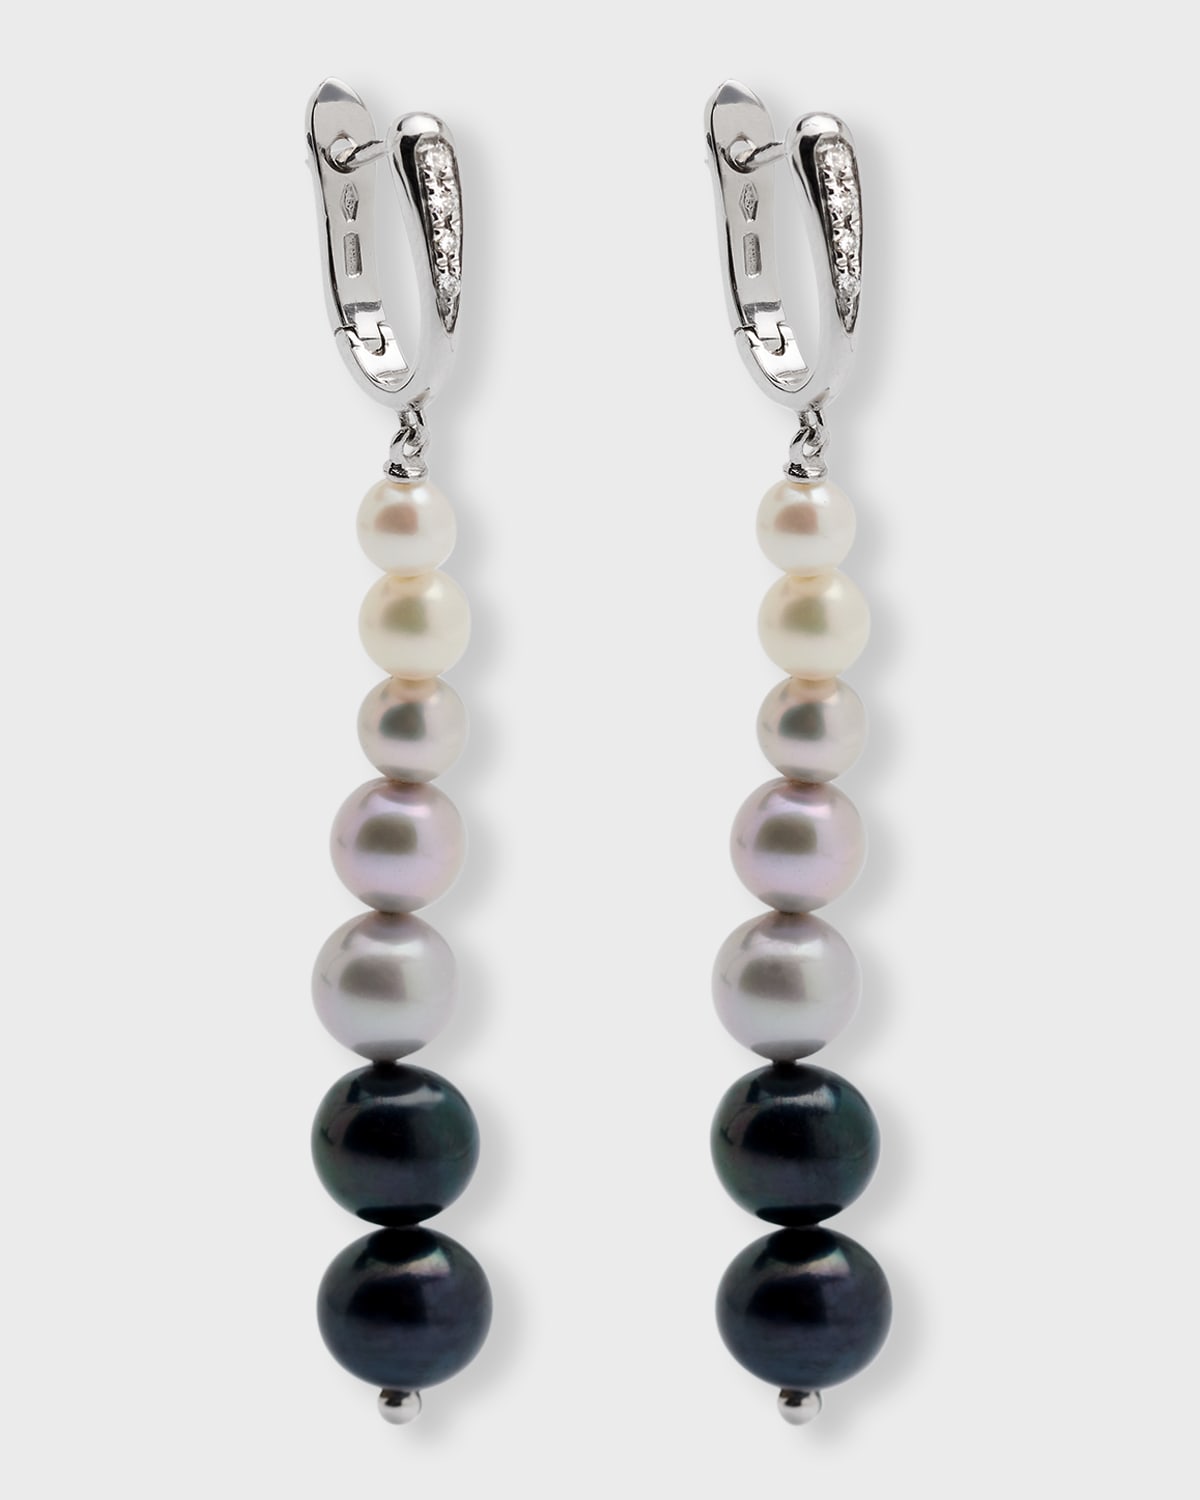 Utopia 18k White Gold Earrings With Diamonds And Graduating Pearls, 4-8mm